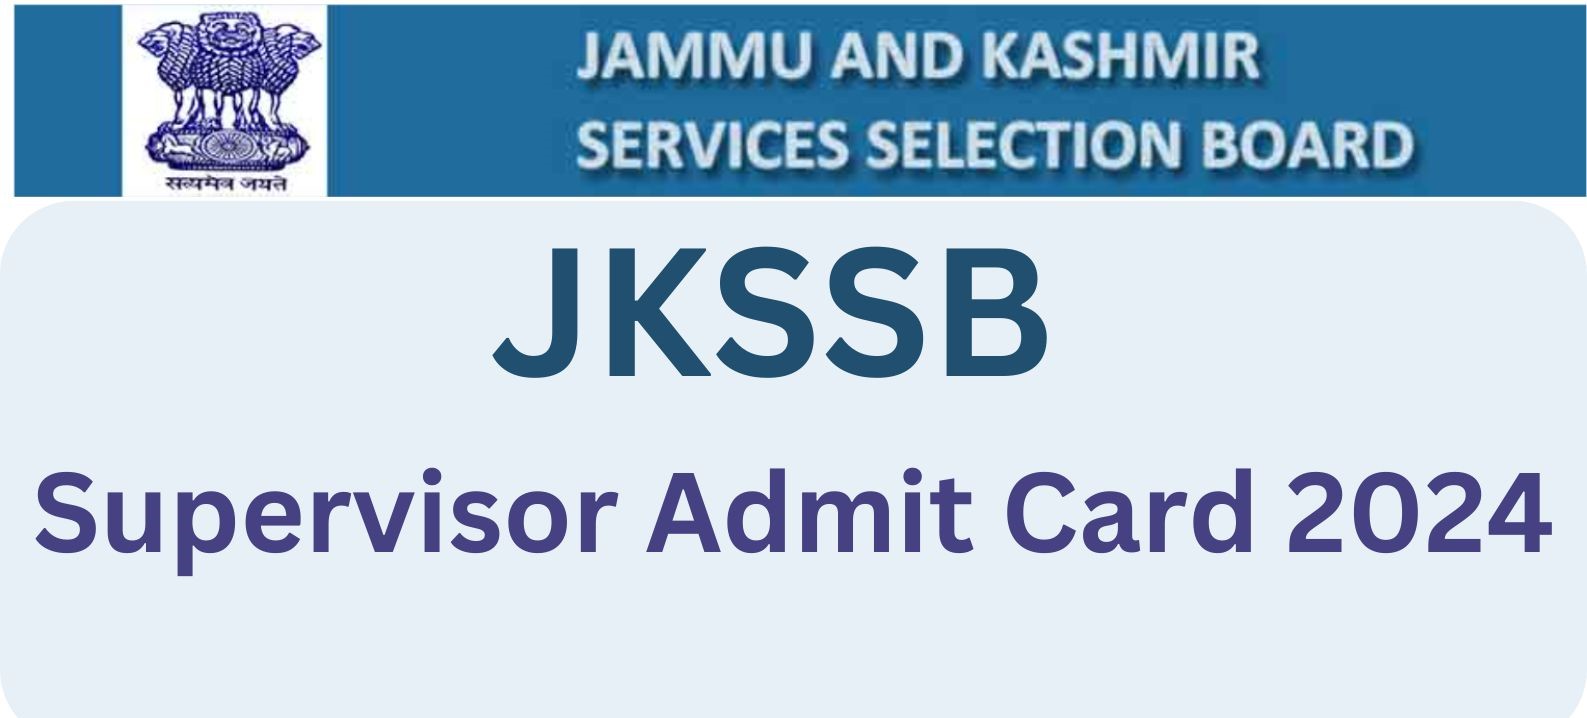 How To Download JKSSB Supervisor Admit Card 2024: Detailed Guide